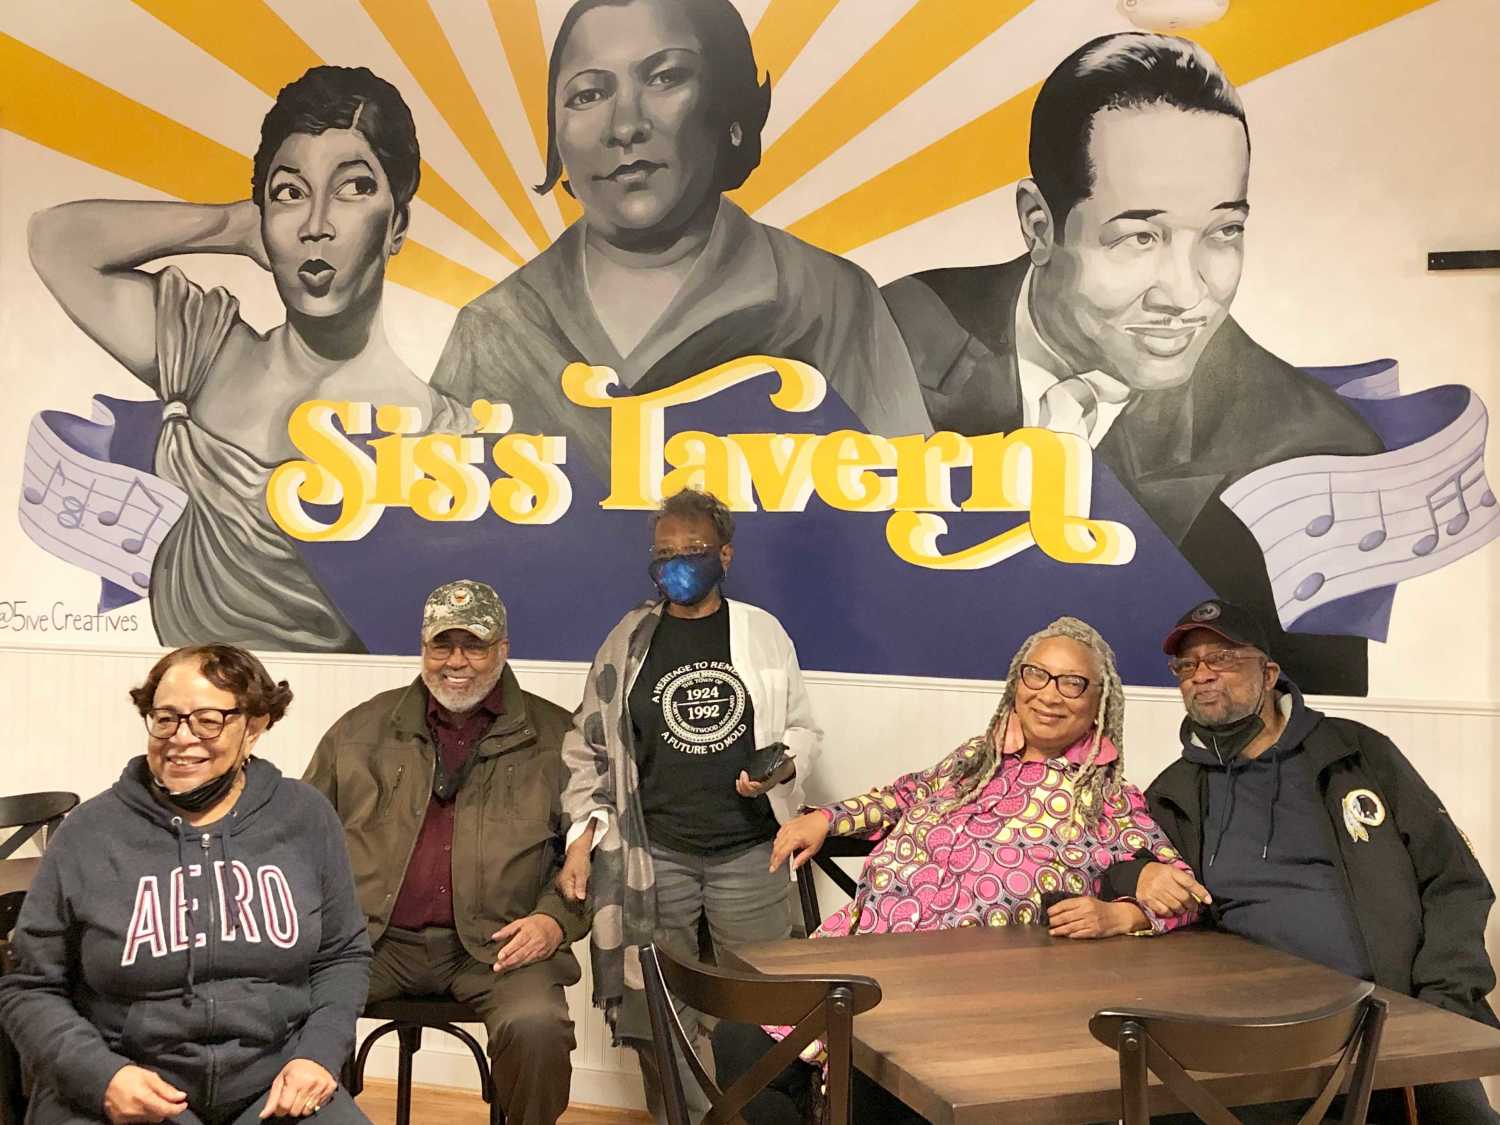 North Brentwood leaders and community members in front of the new mural at Sis’s Tavern L-R (Mayor Petrella Robinson, Franklin S. & Edith Daley, Deborah and John Dickerson- son and daughter-in-law of Sis Walls)
